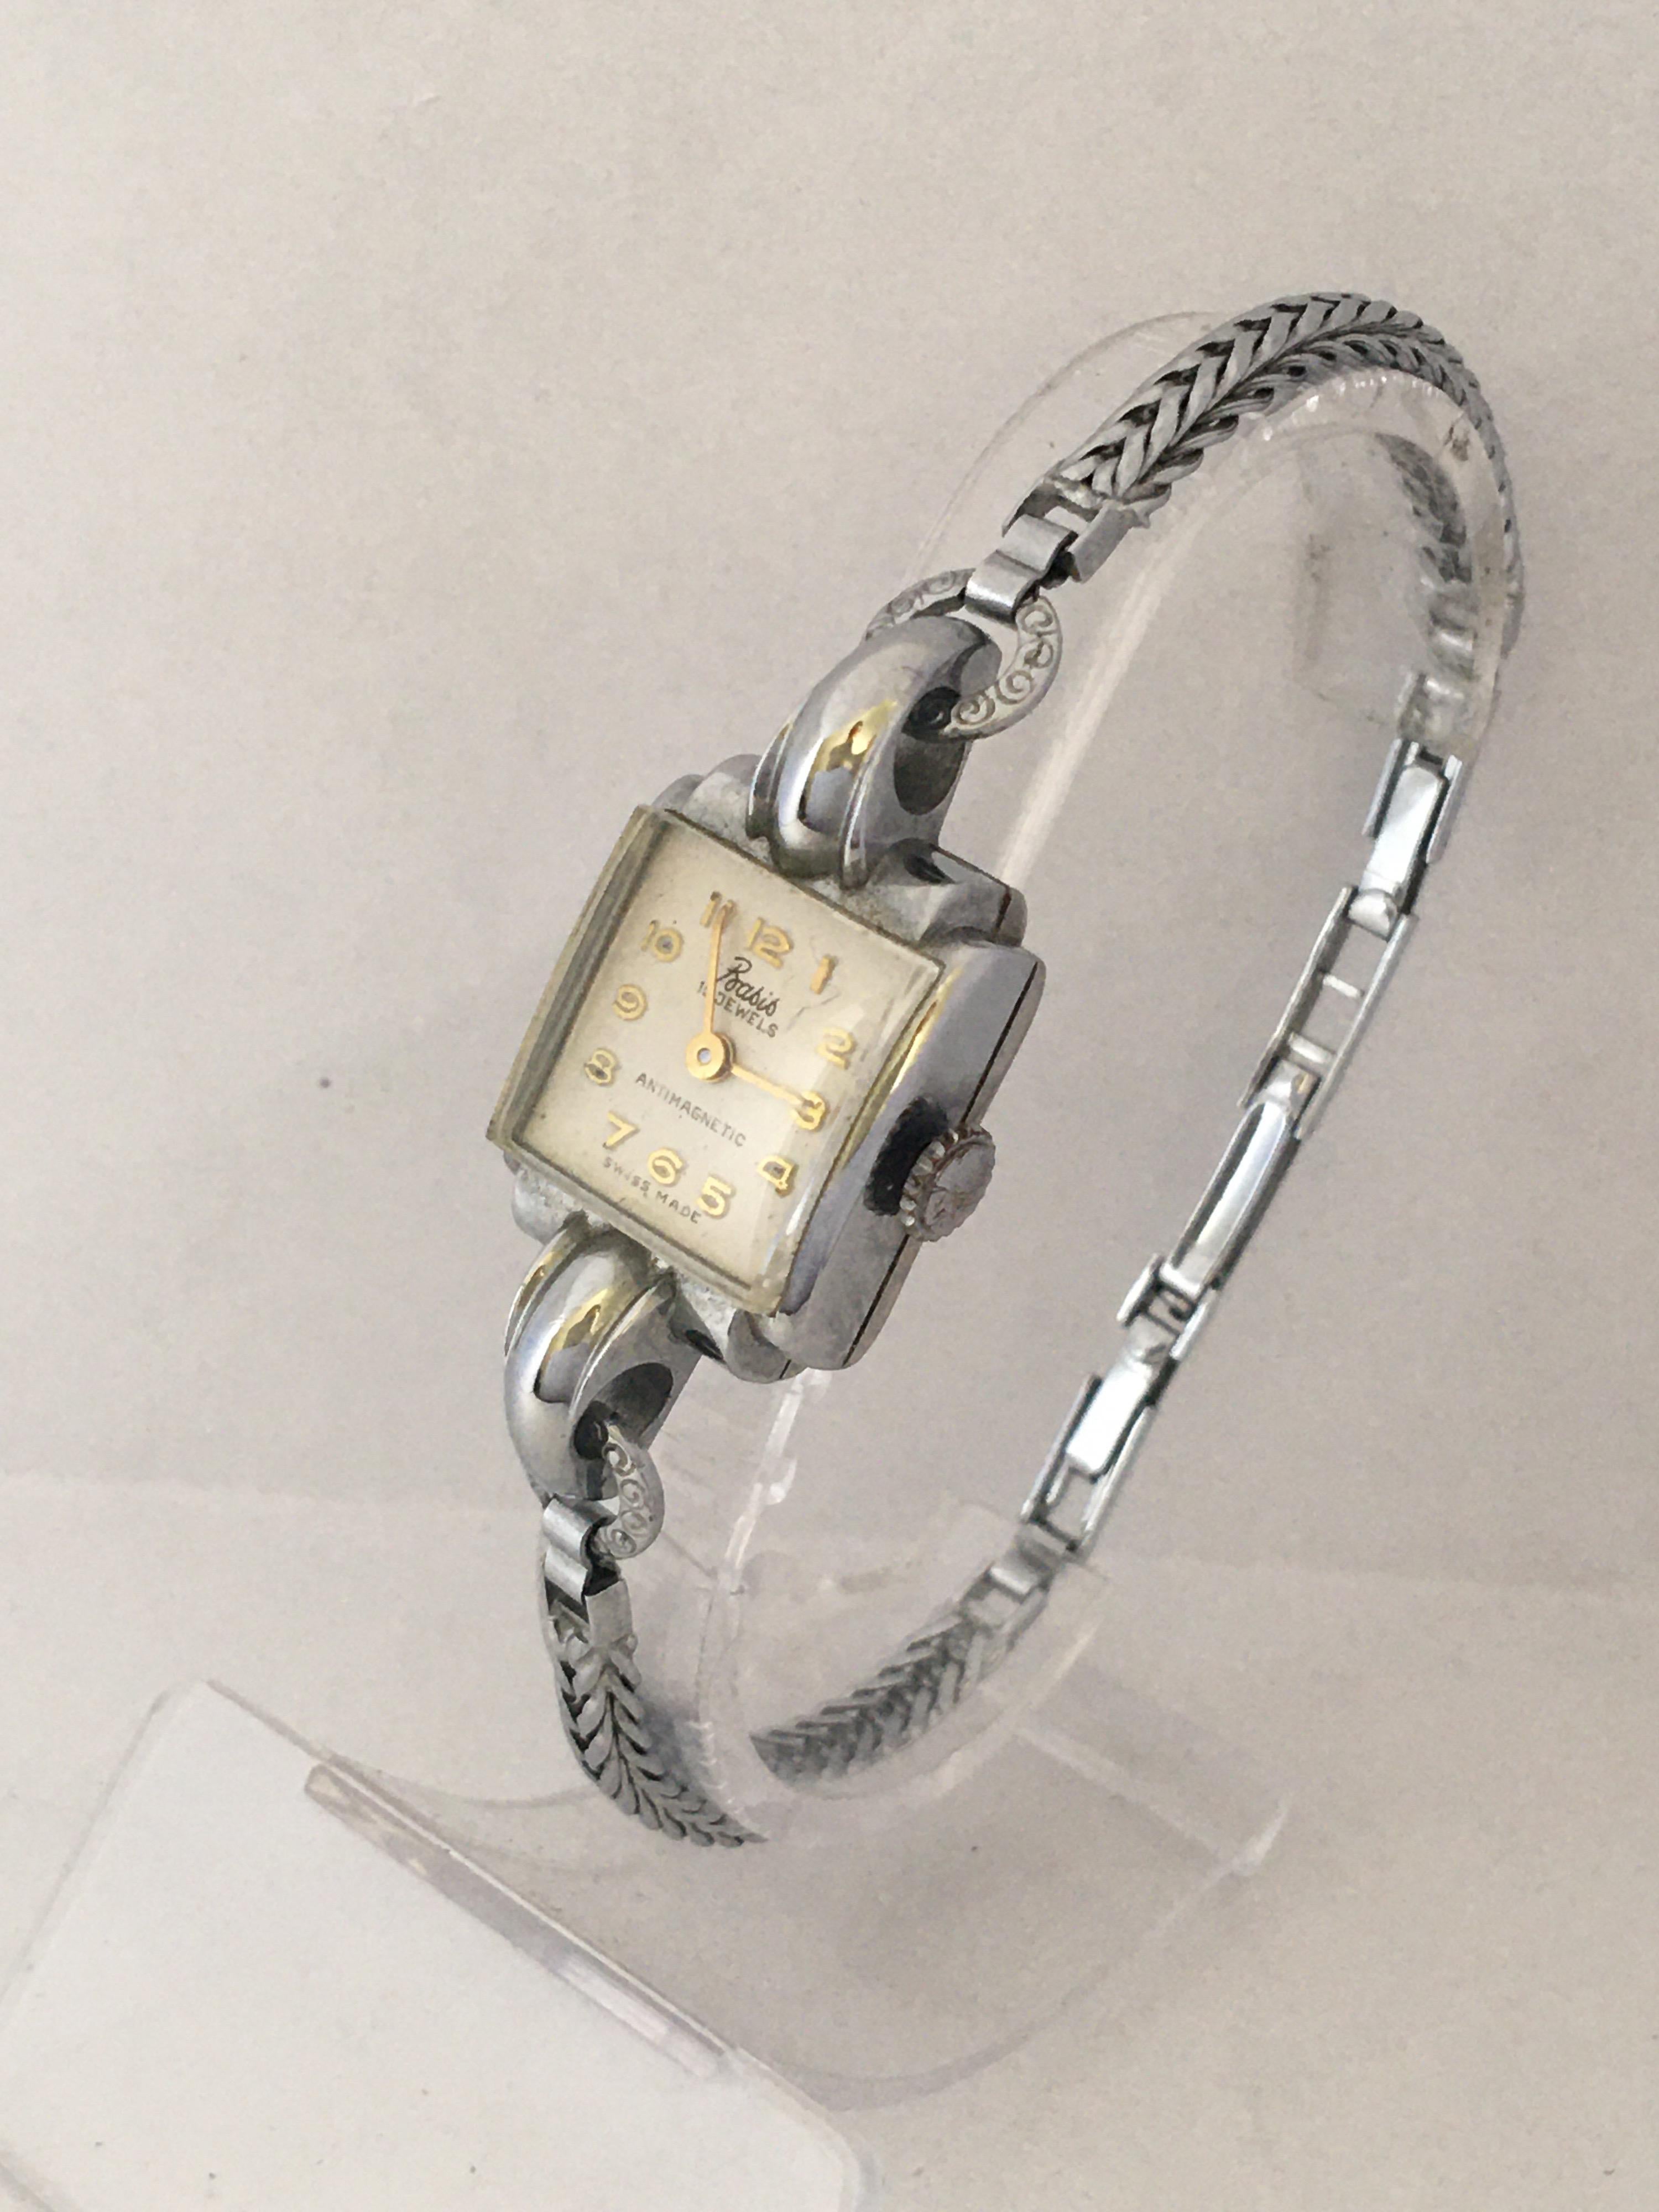 This beautiful pre-owned vintage hand winding ladies watch is in good working condition and it is ticking nicely and runs well. It measure 7 inches long around the wrist.